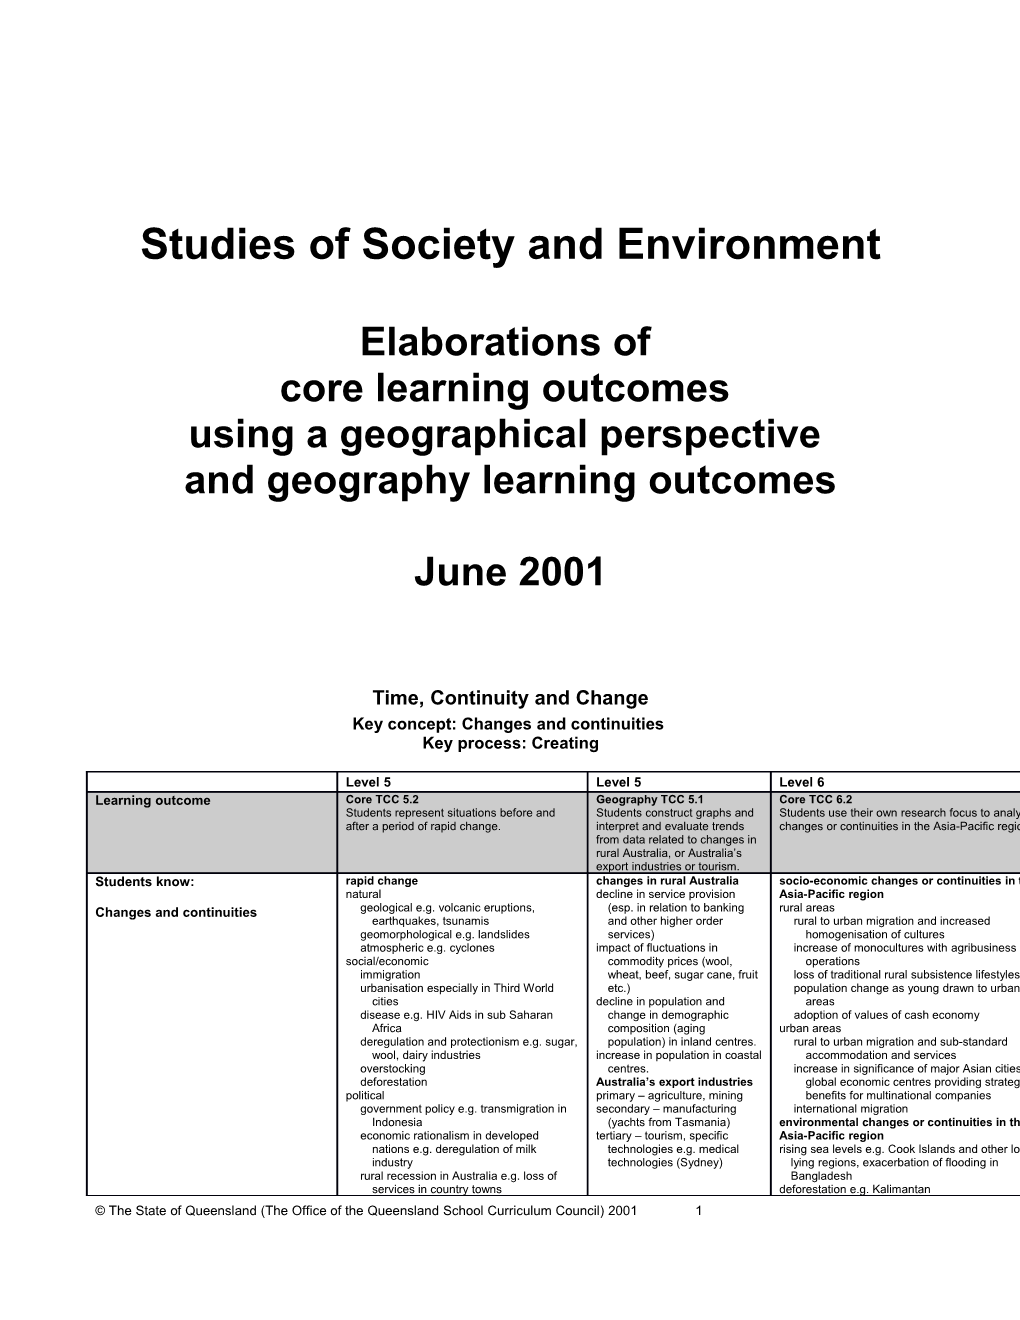 Elaborations of Core Learning Outcomes Using a Geographical Perspective and Geography Learning